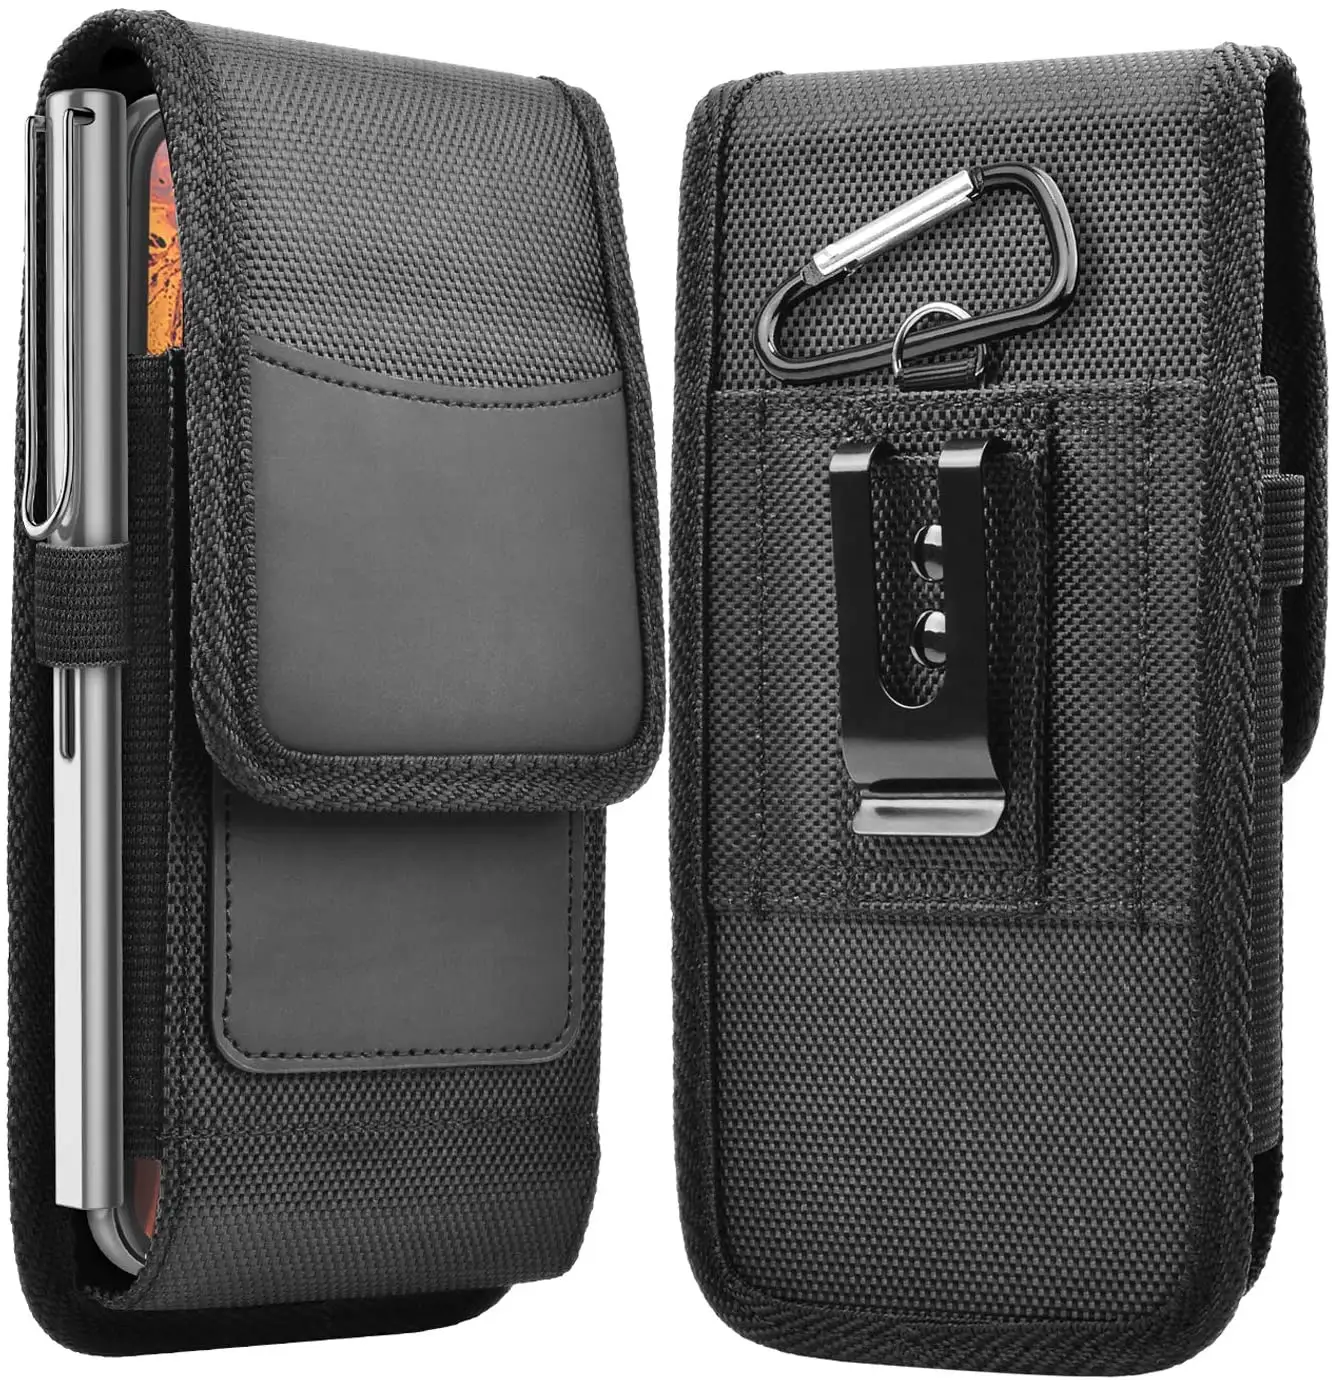 High quality Leather Phone Holster for Belt cellphone Pouch cover with Credit Card Holder for iPhone Samsung and smartphone